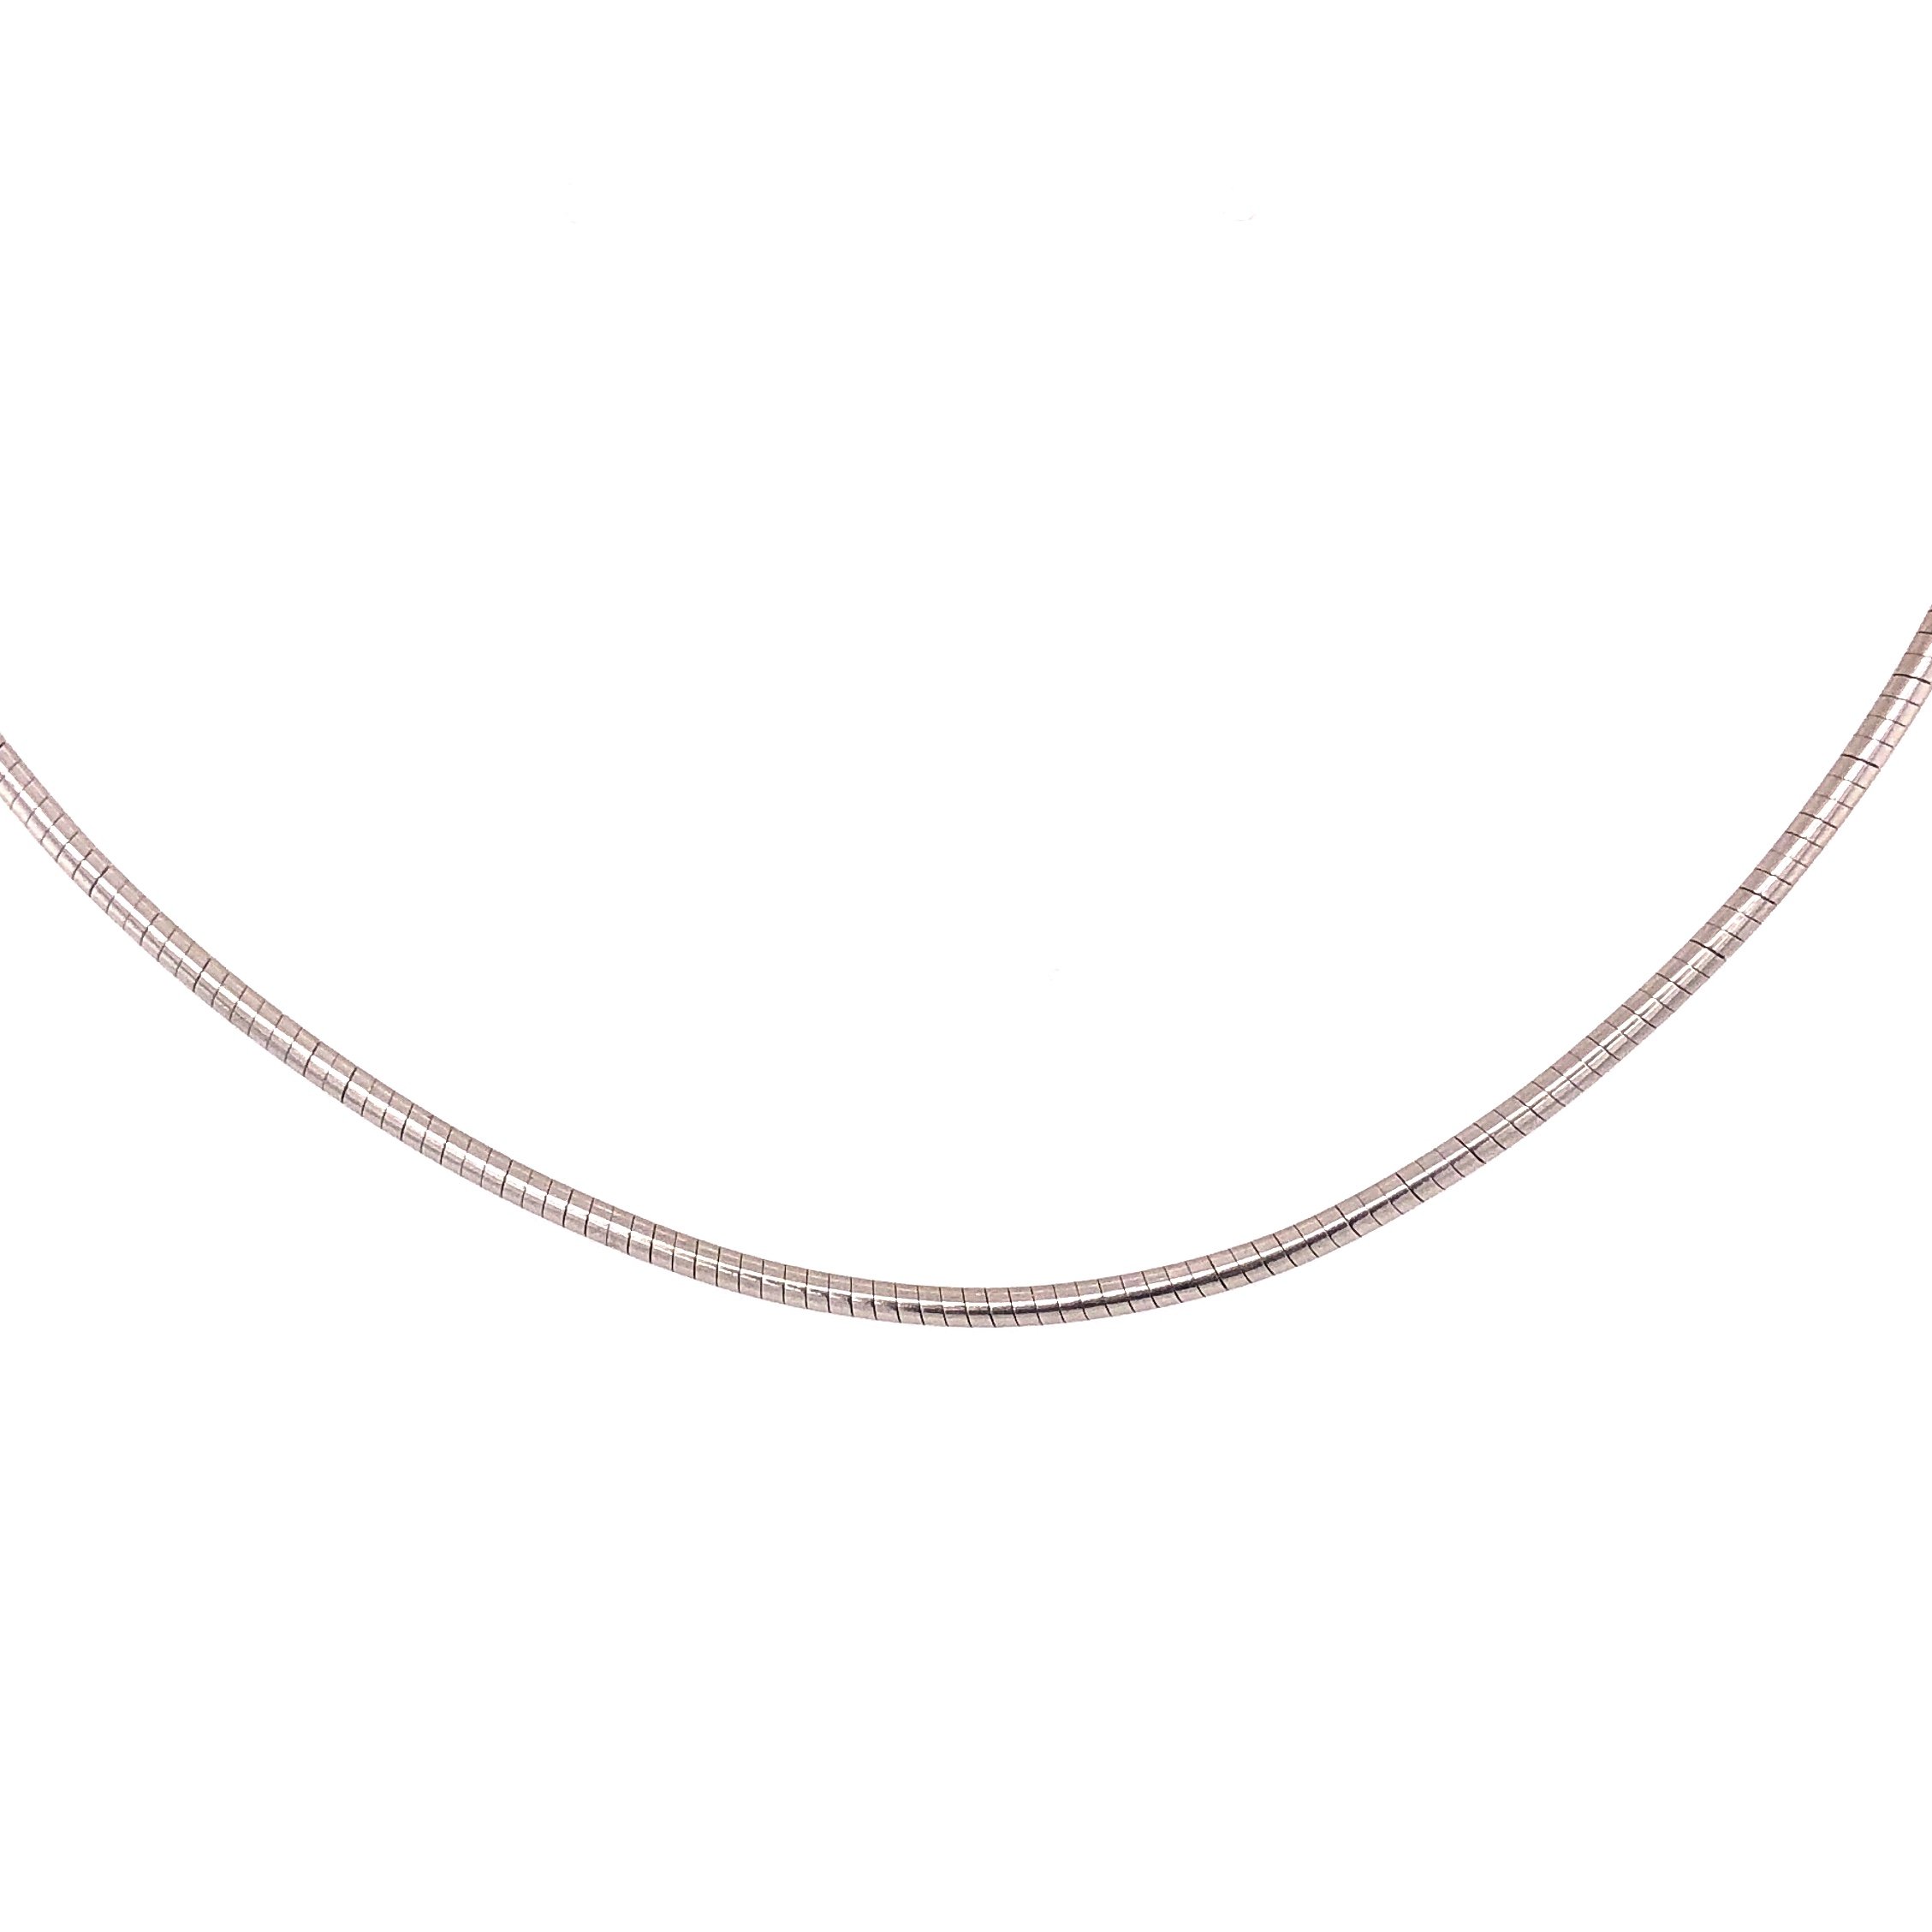 14K White Gold ITALIAN 1.4mm Thin Omega Chain Necklace 16"